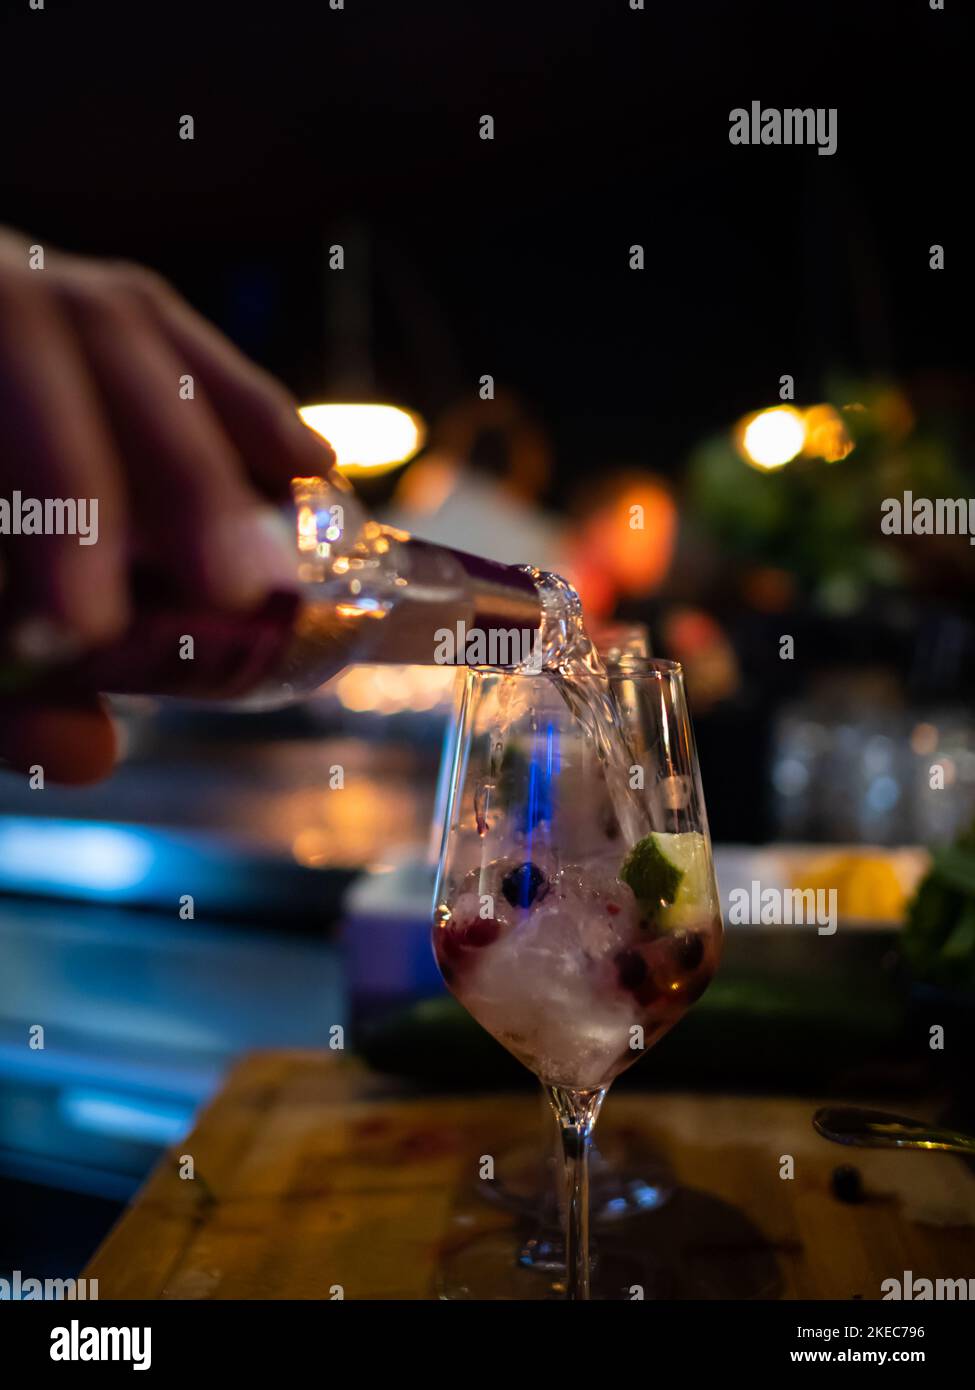 Mixing a cocktail at a bar. The bartender is pouring in a drink with wild berries and ice cubes. Close-up of the glass on the wooden table. Stock Photo